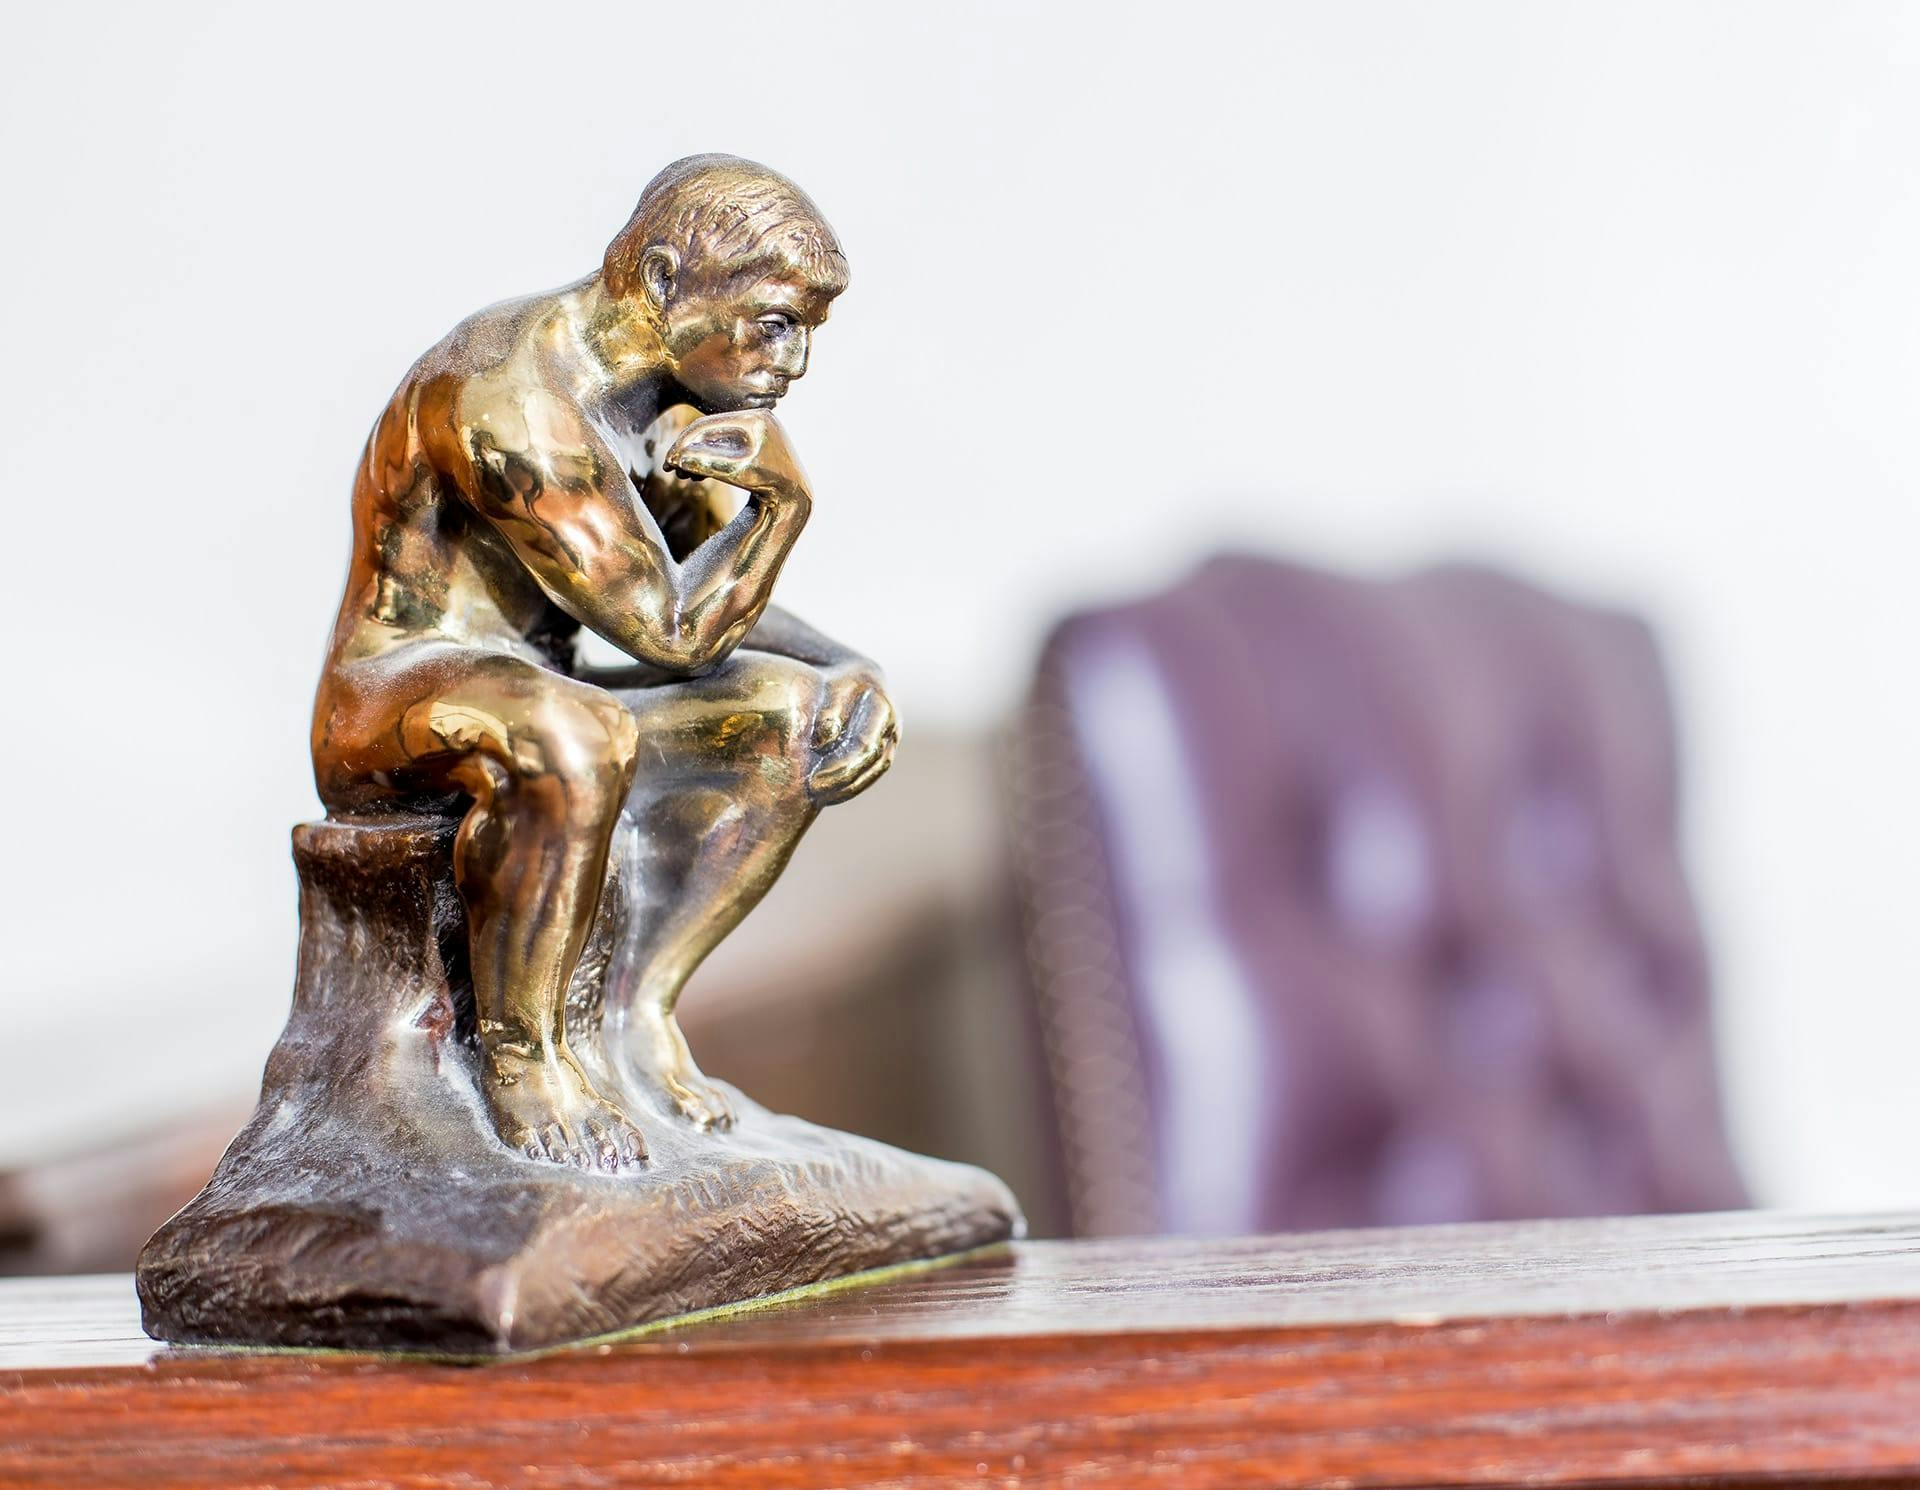 The thinking man statuette